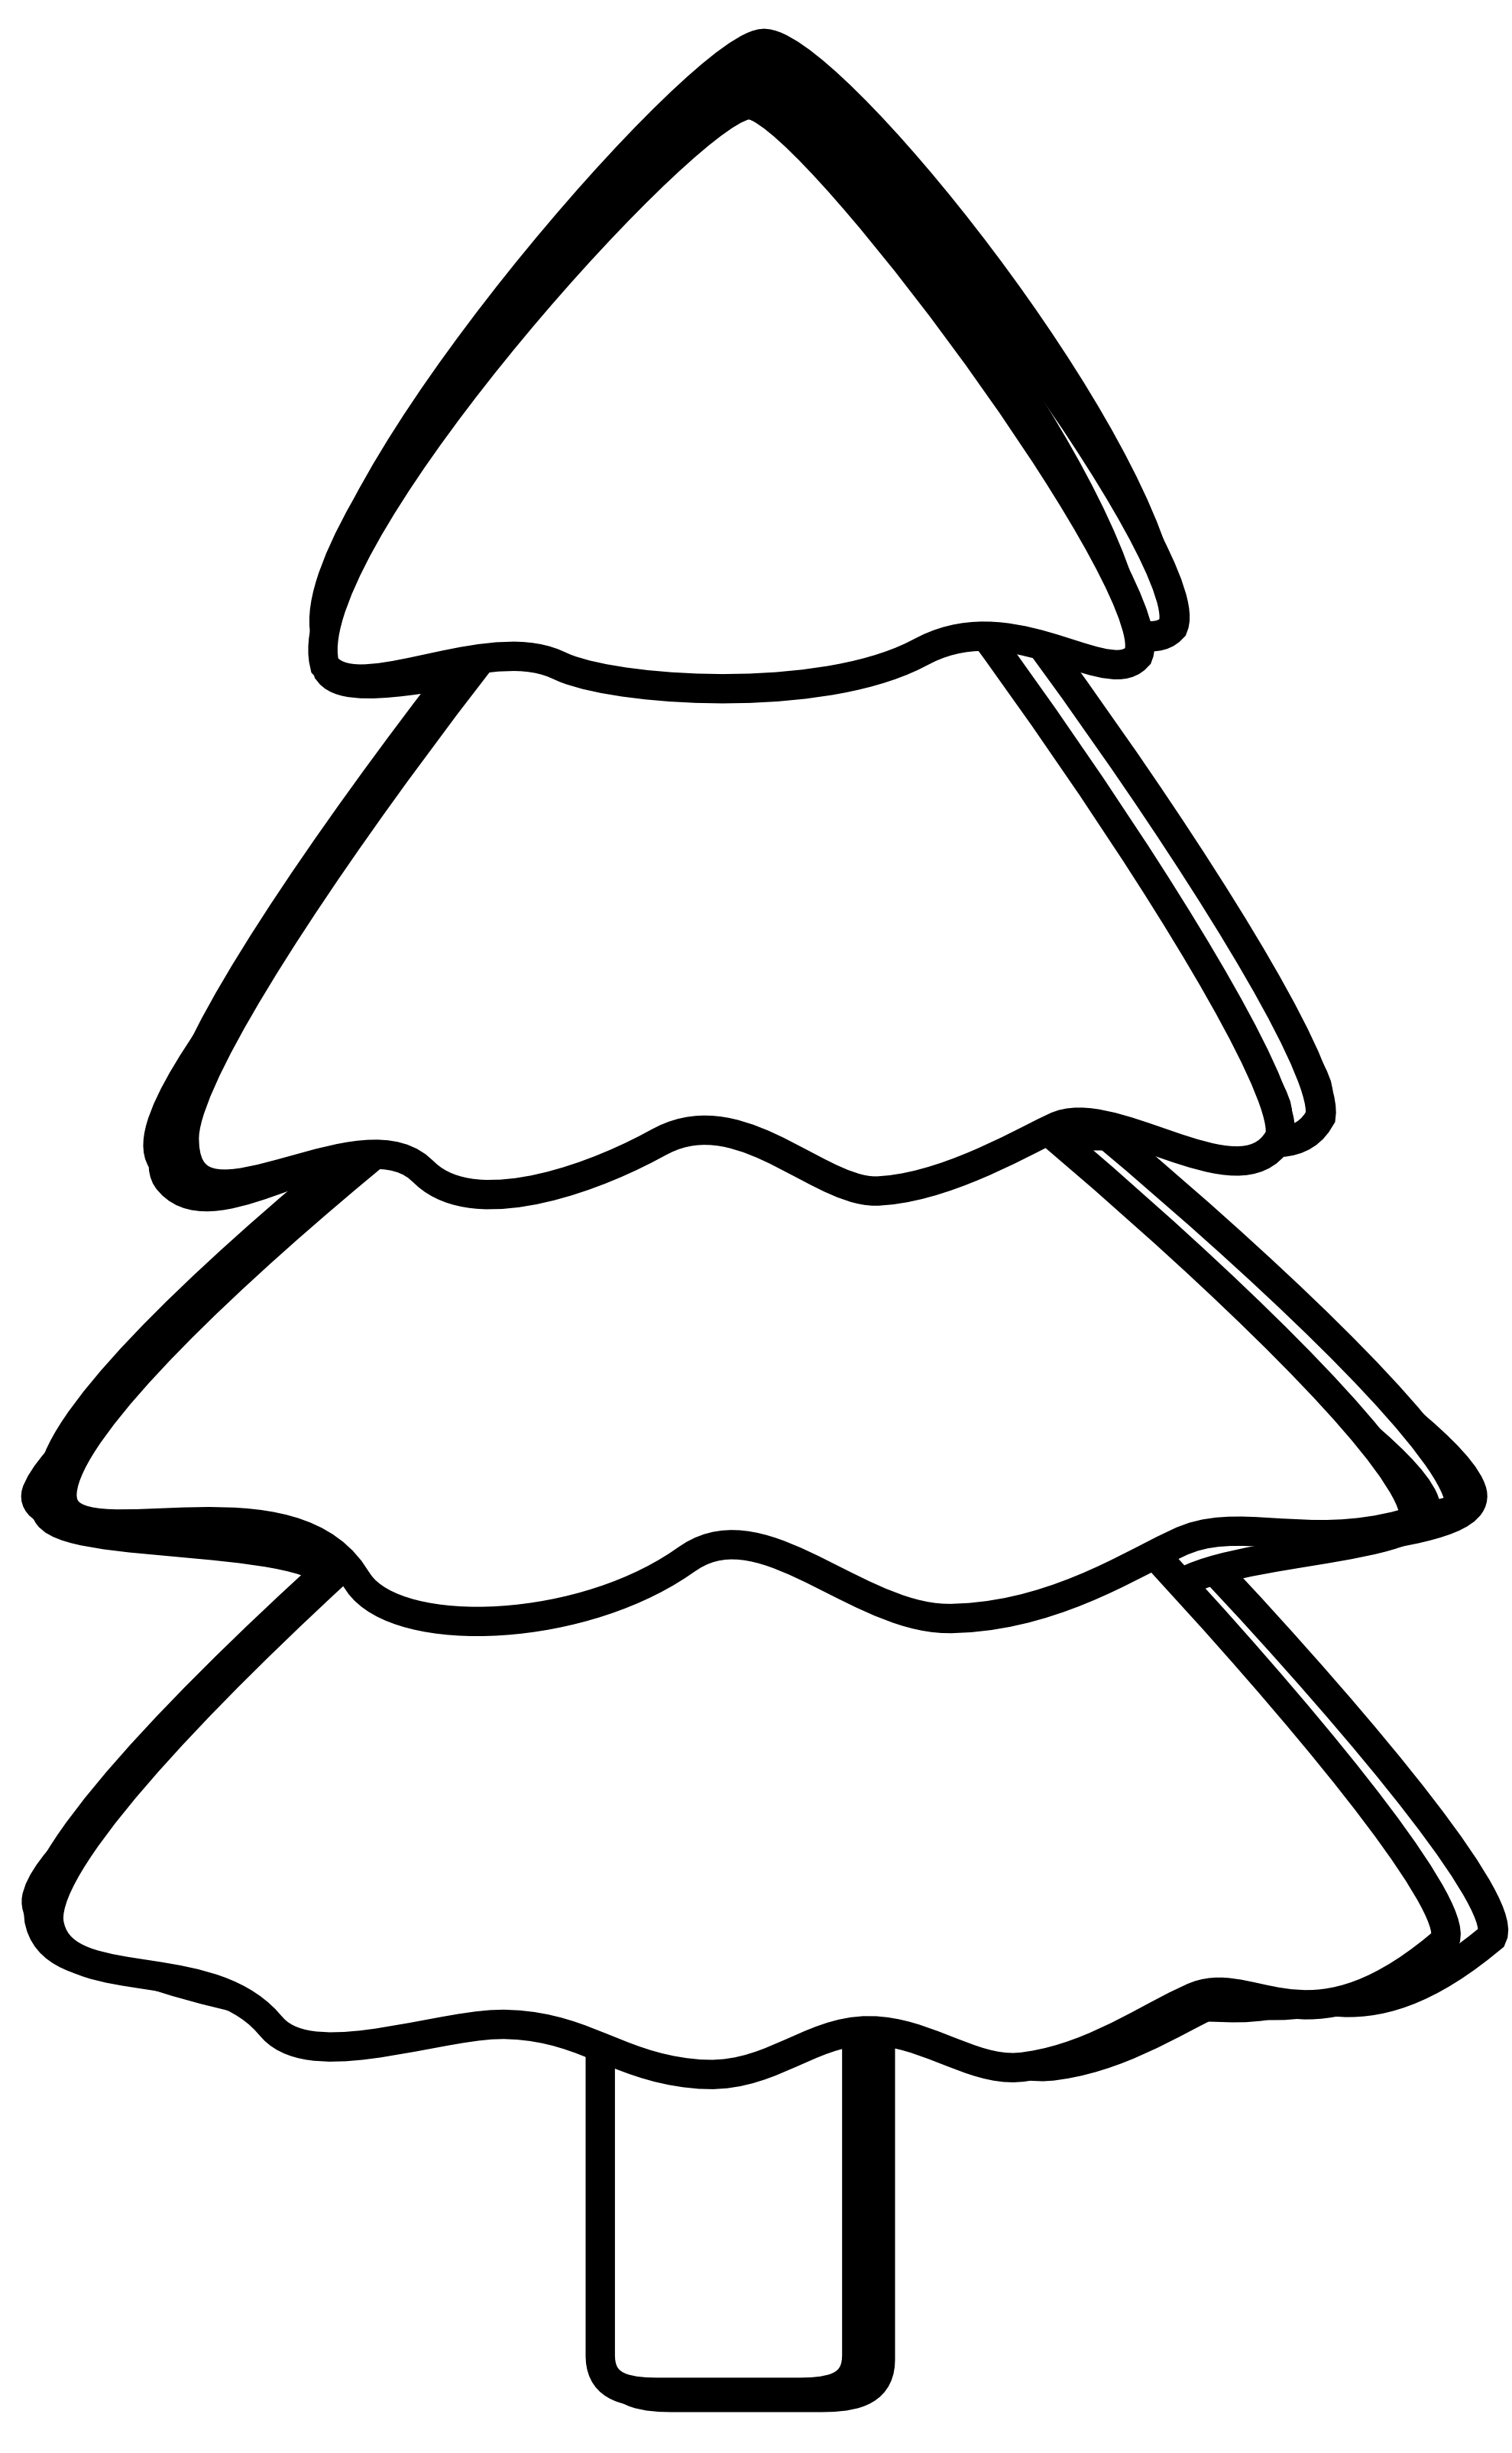 Free Black And White Tree Images, Download Free Clip Art